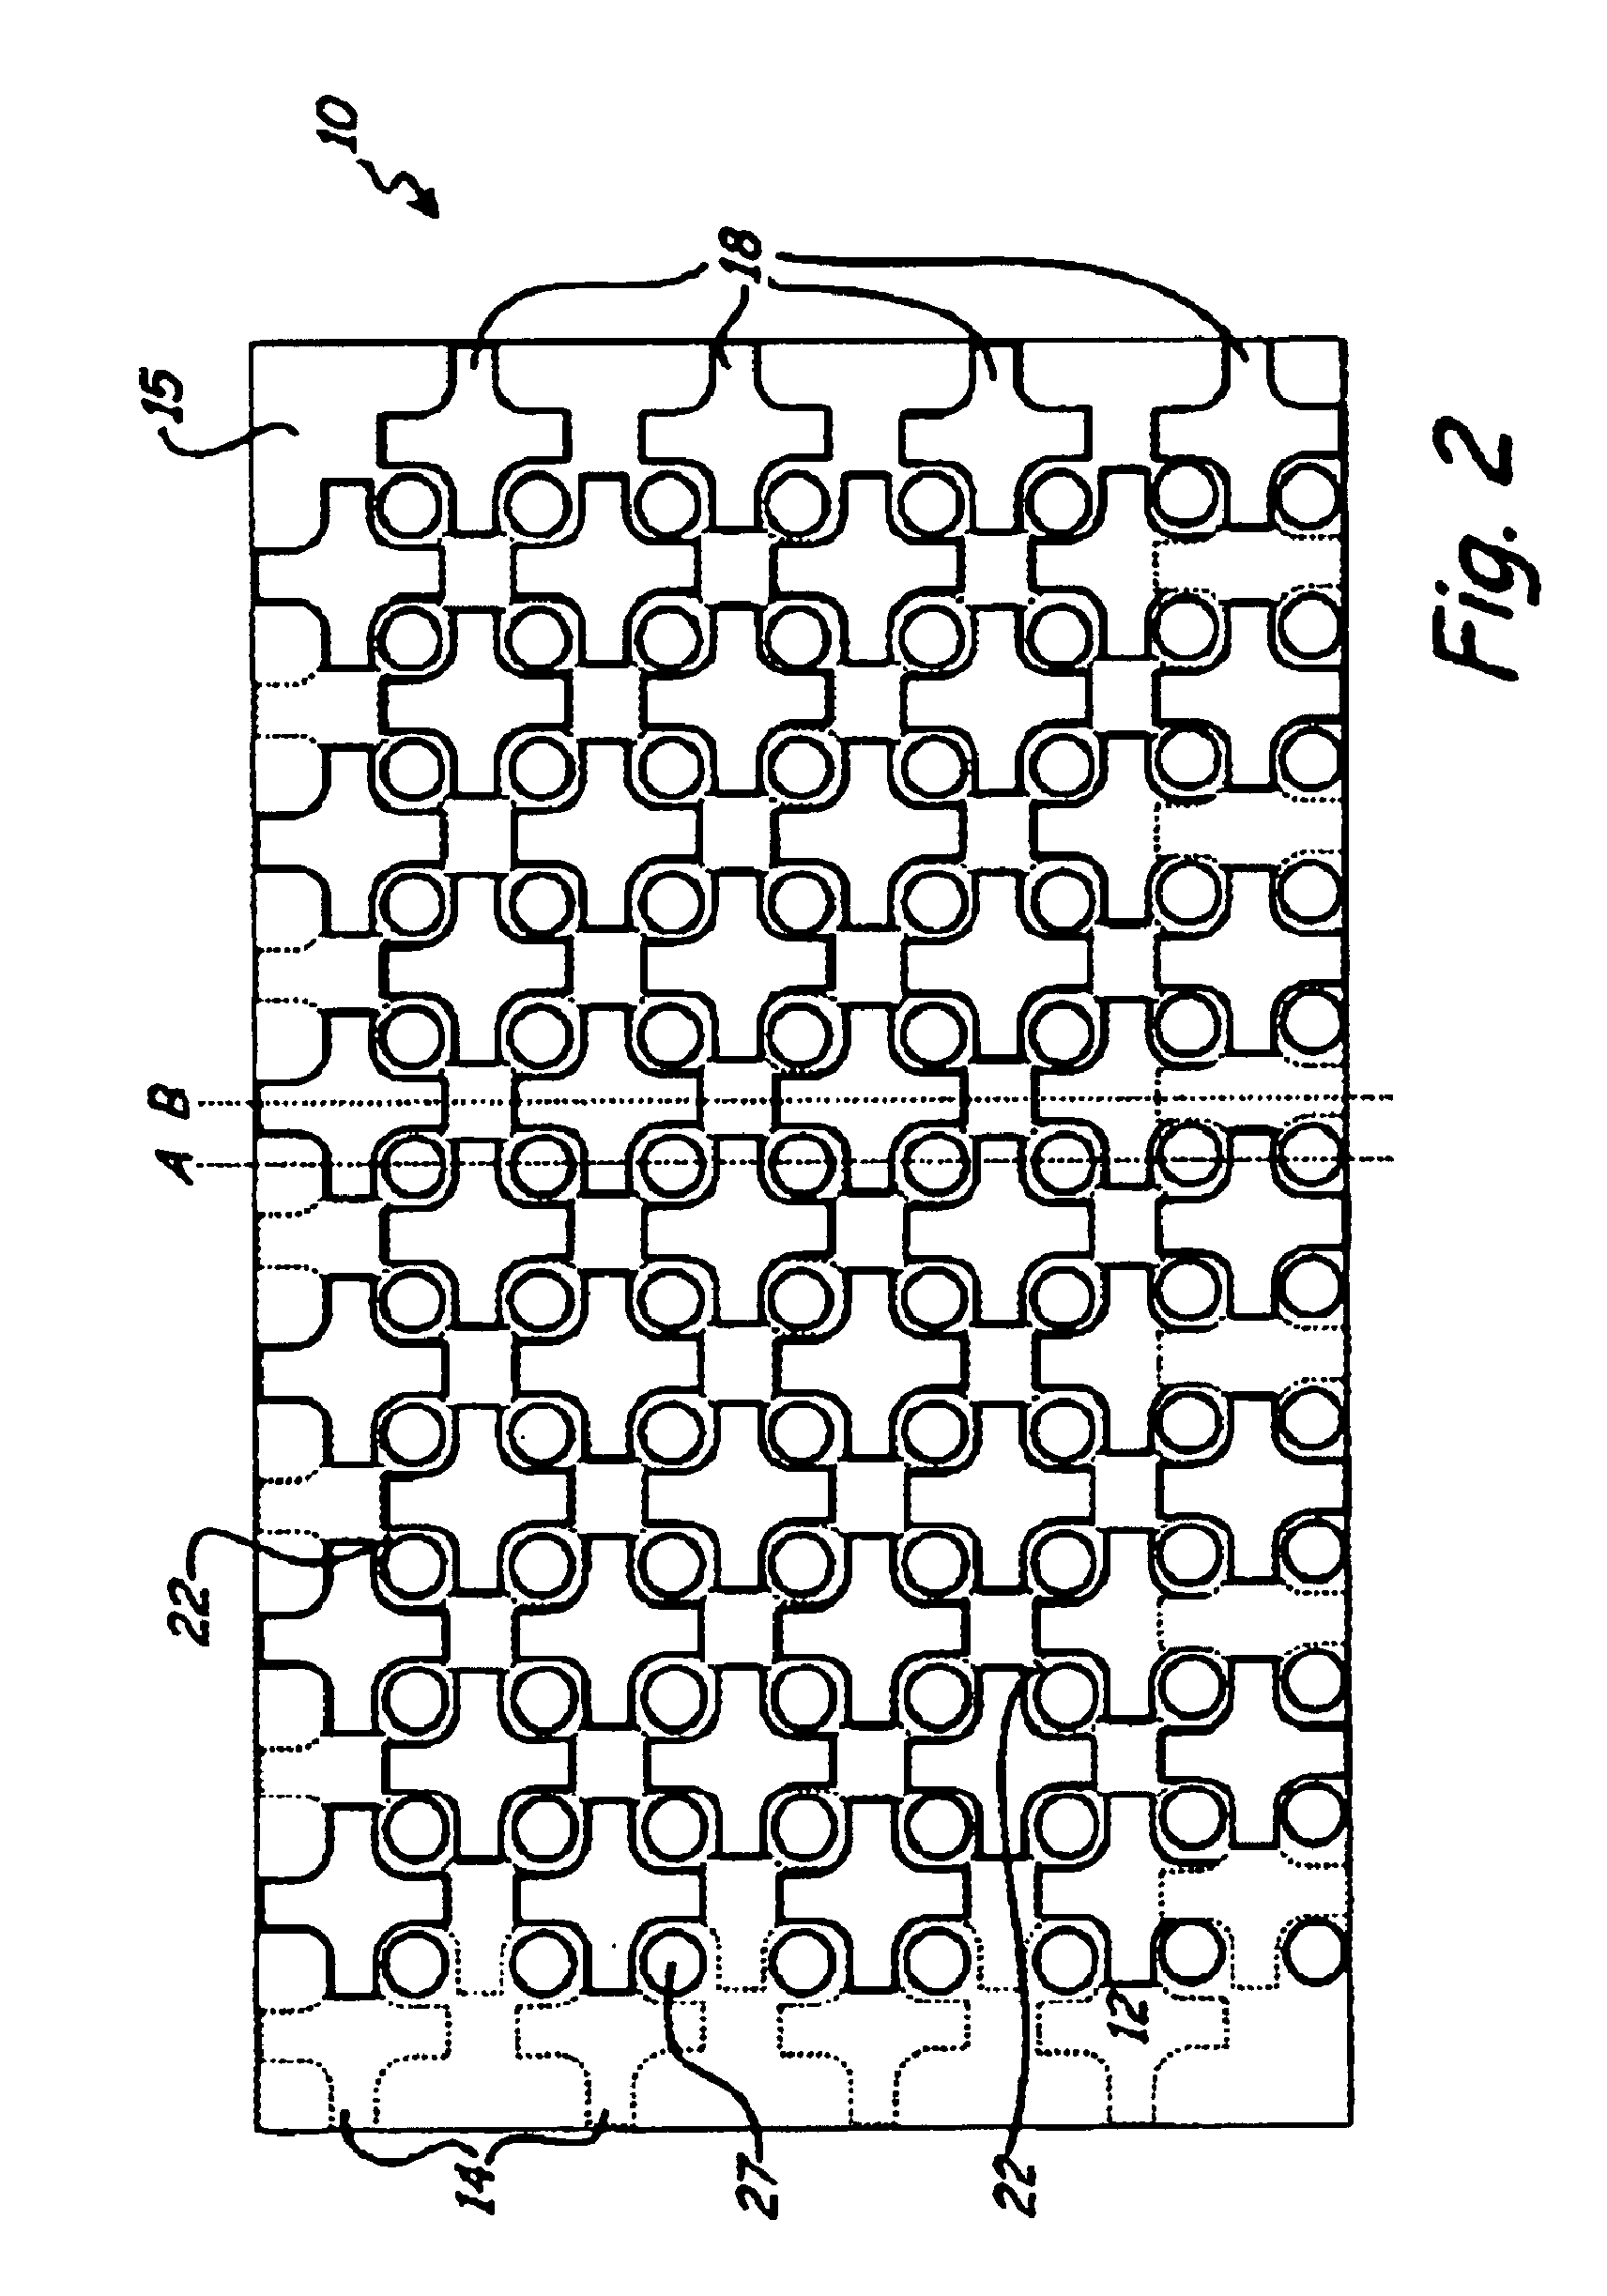 Supple penetration resistant fabric and method of making